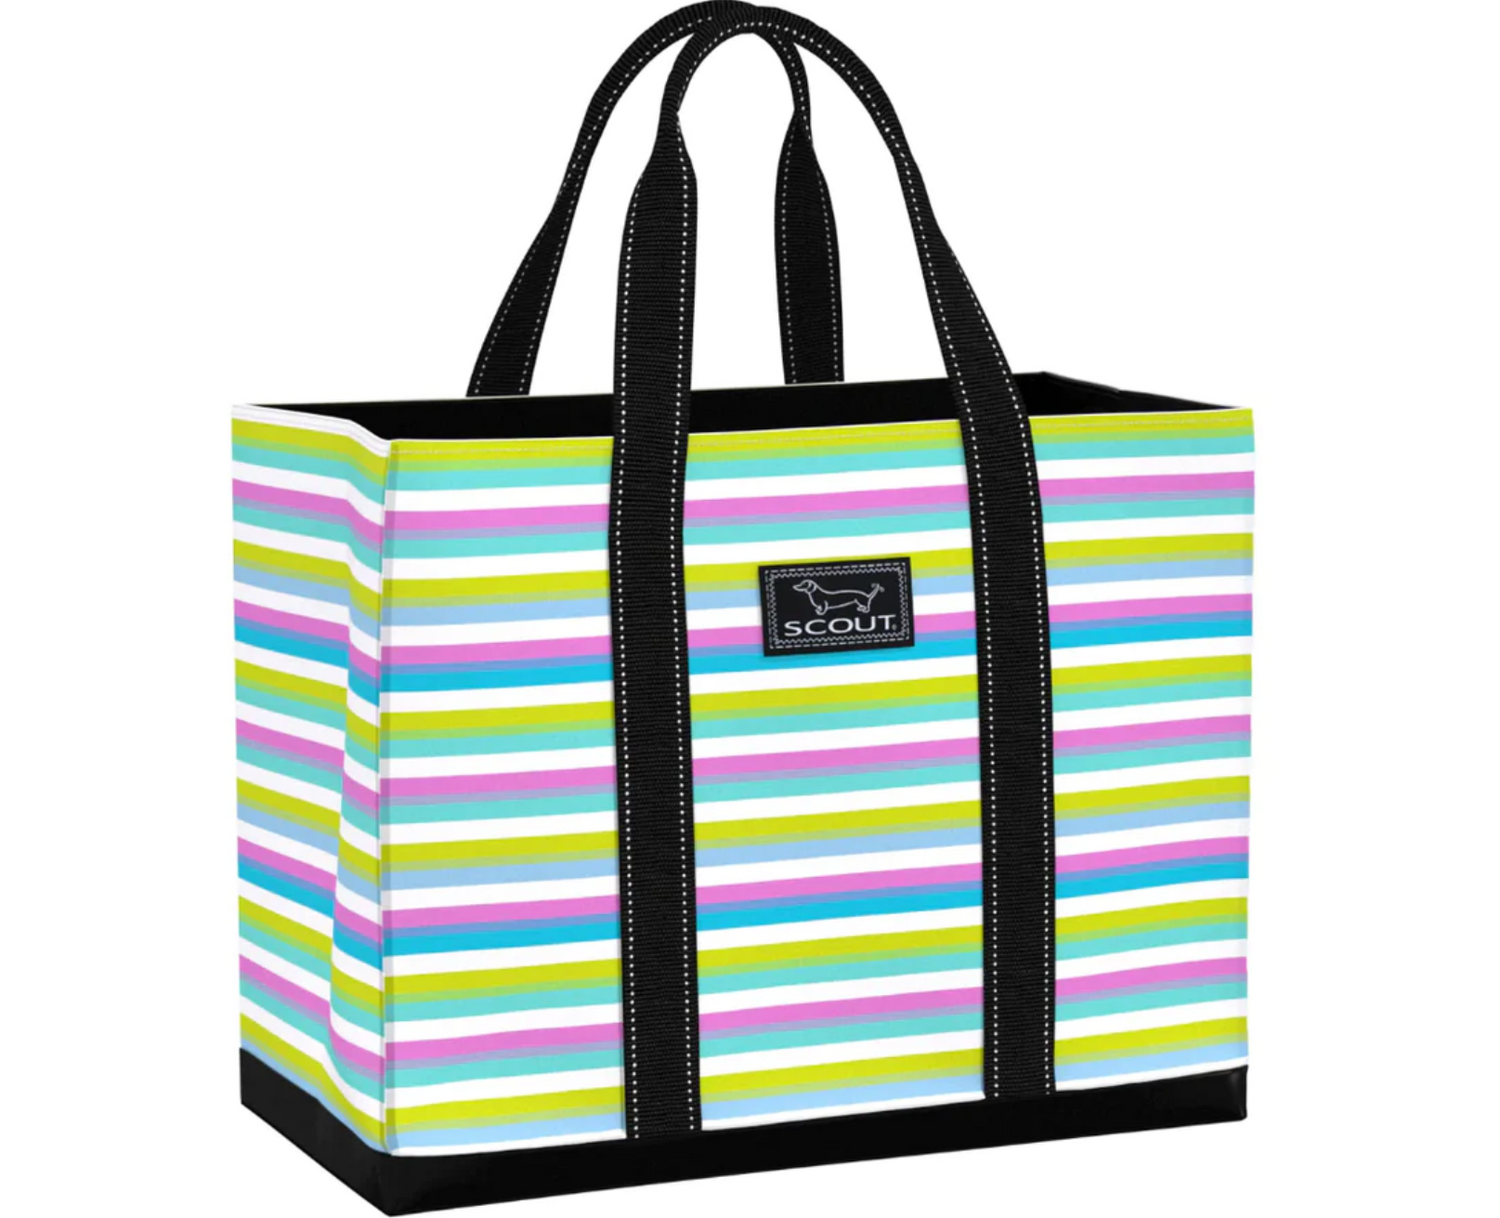 Scout Original Deano Tote Luggage, Totes in Sweet Tarts at Wrapsody